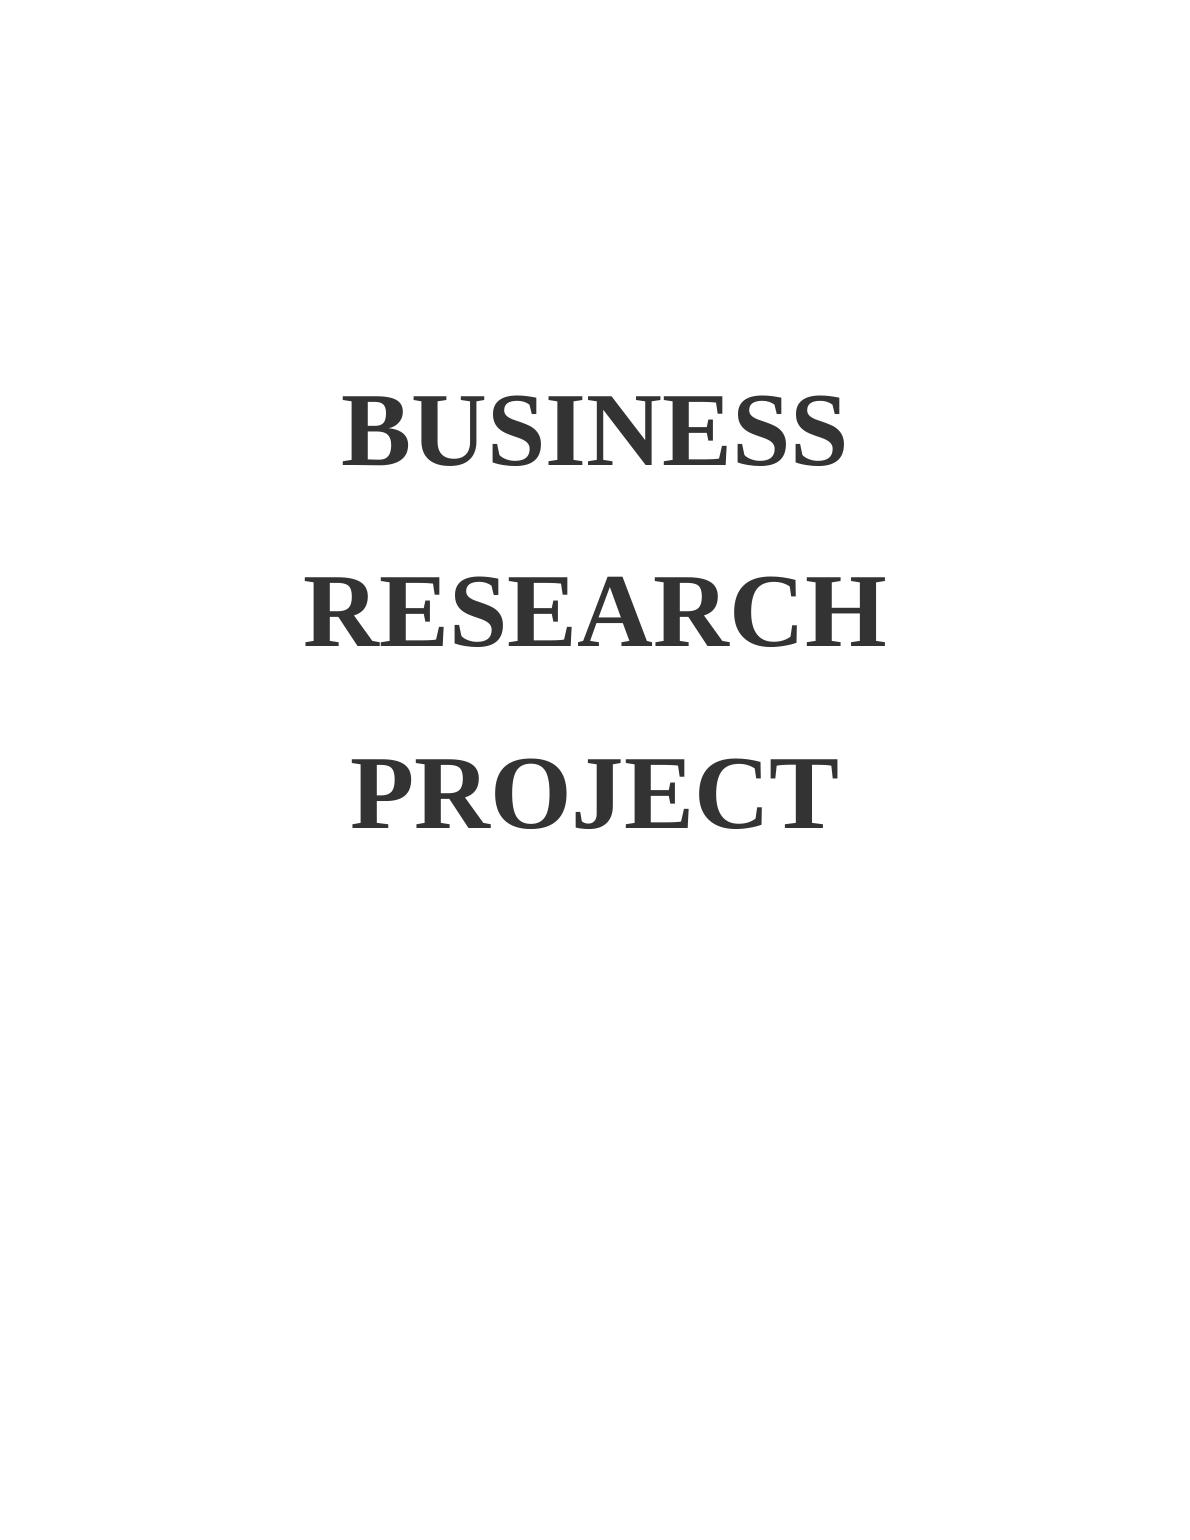 BUSINESS RESEARCH PROJECT CHAPTER 1 INTRODUCTION 3 1.1 Research proposal 3 1. Research project specification 3 3. Research approach 4 4. Activities & time scale4 CHAPTER 1 INTRODUCTION 3 2.1 Literatur_1